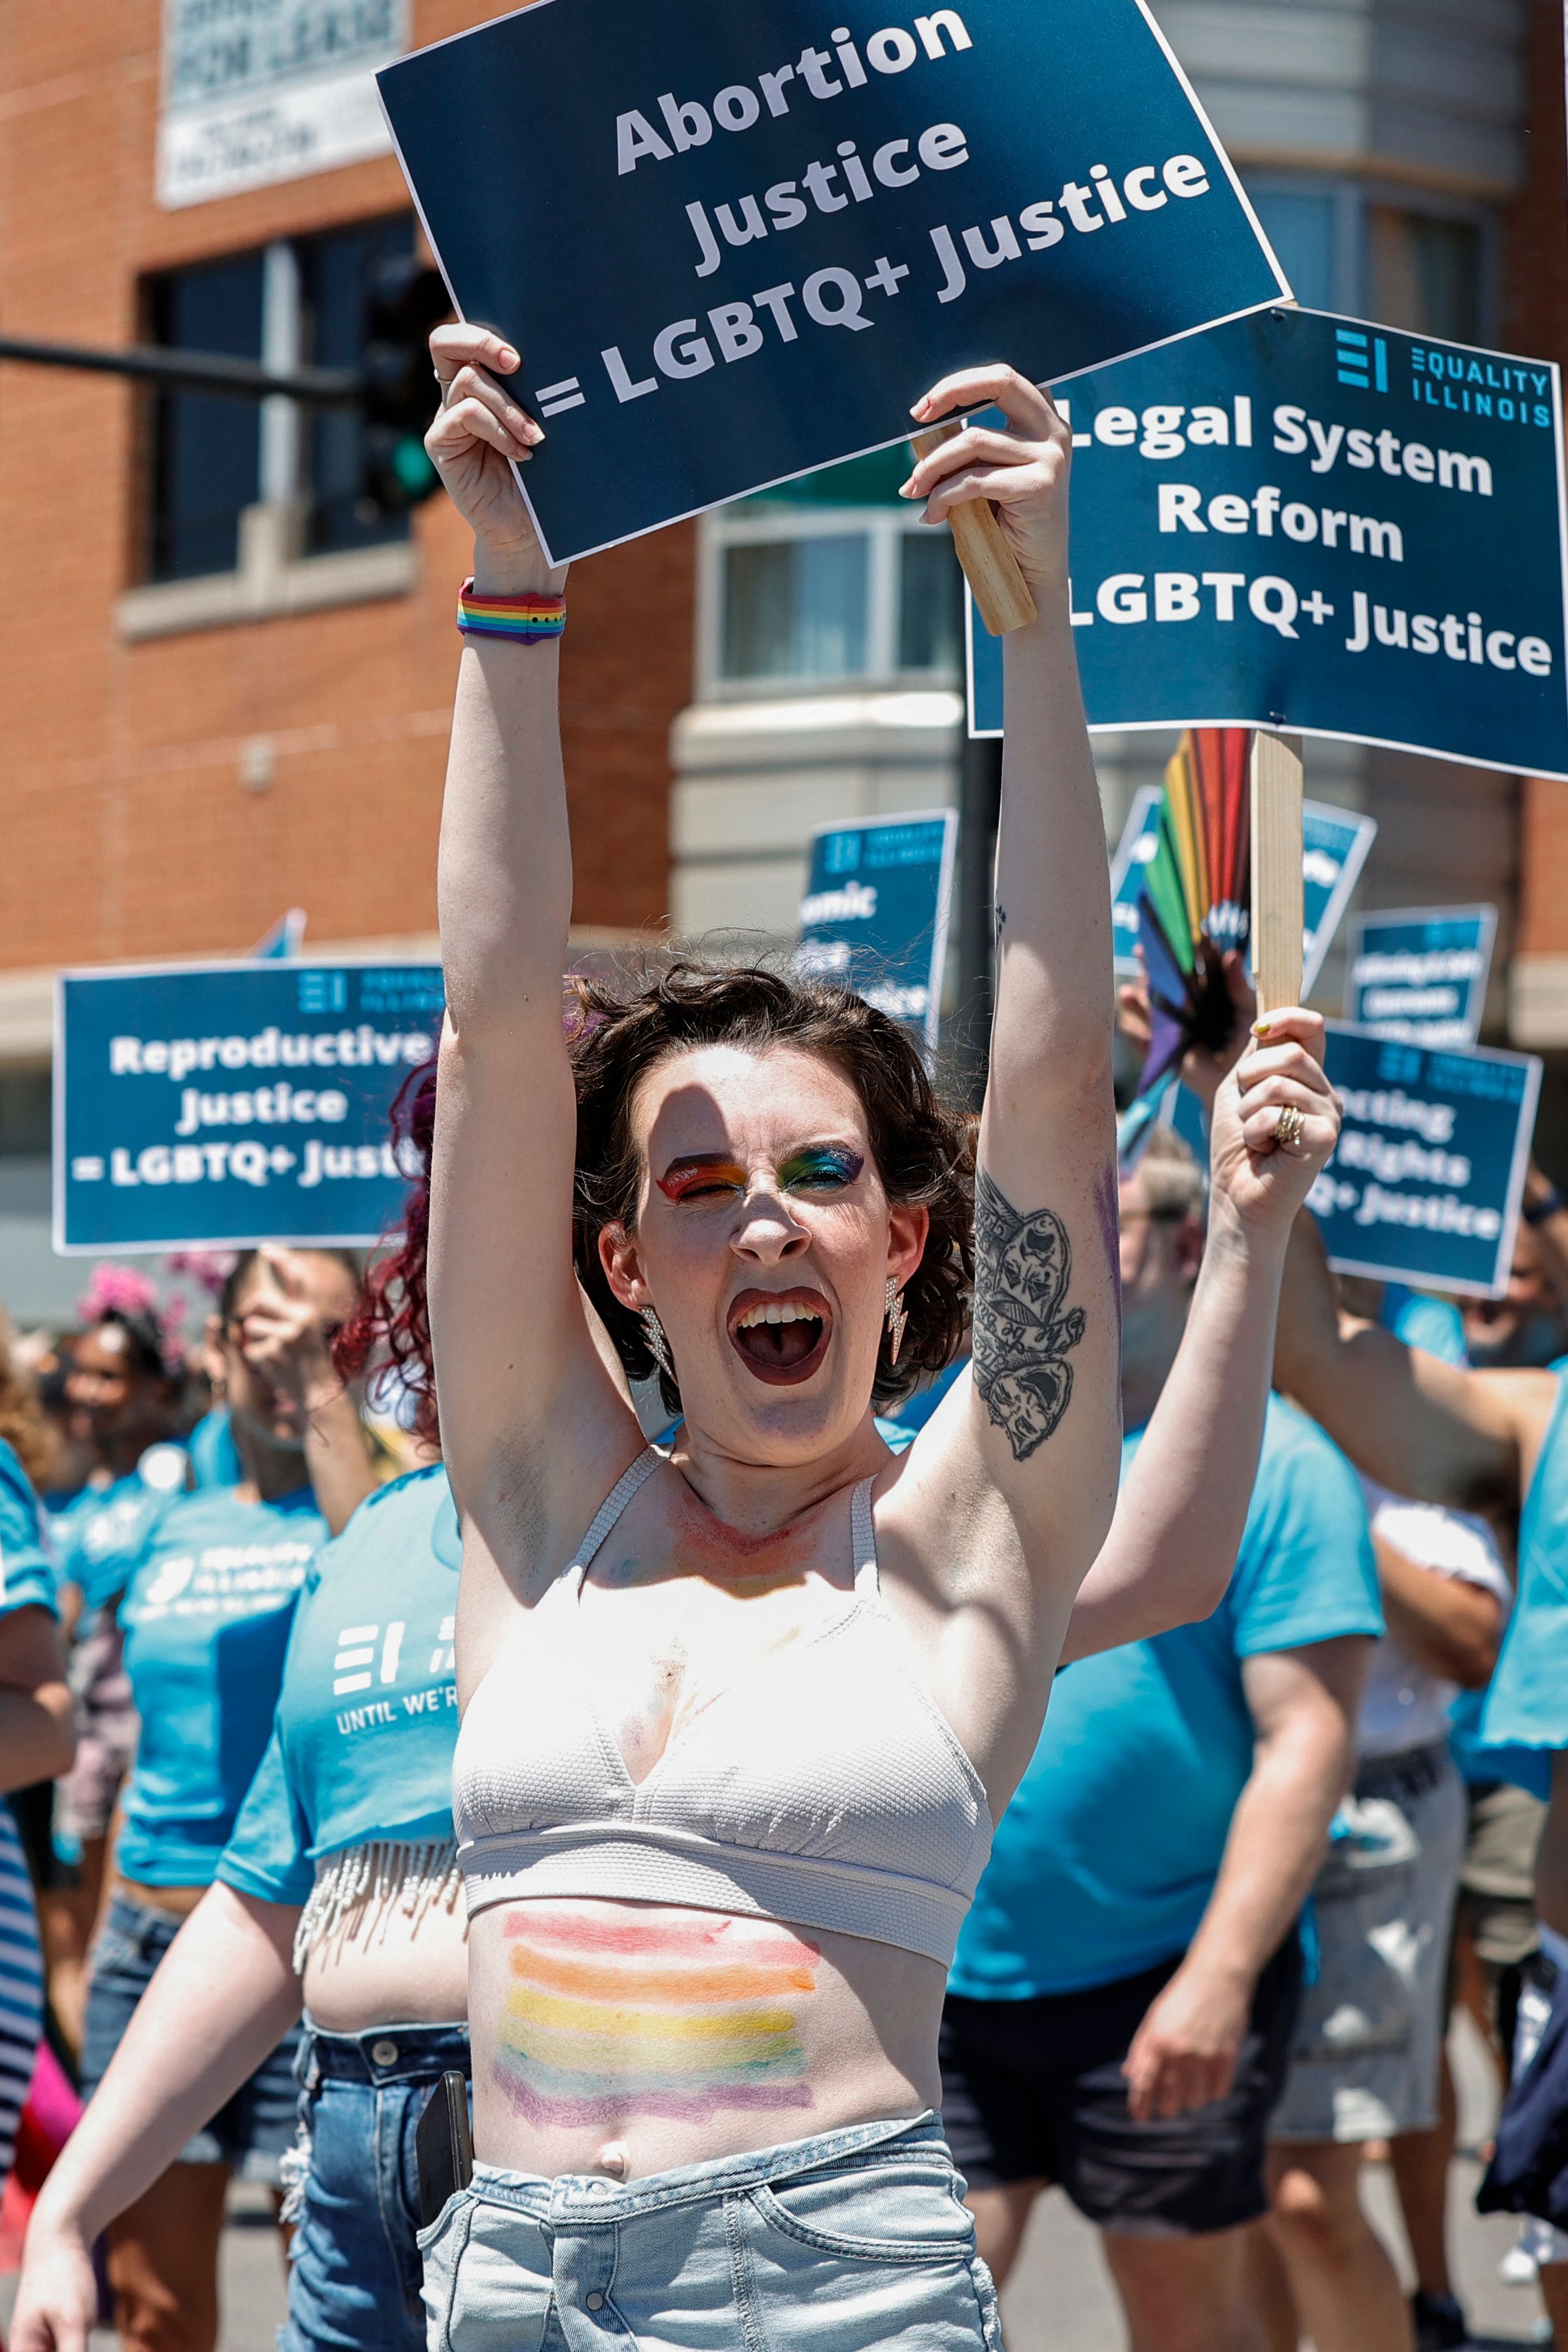 A person holds an abortion rights placard during the 51st LGBTQ Pride Parade in Chicago, Illinois, on June 26.